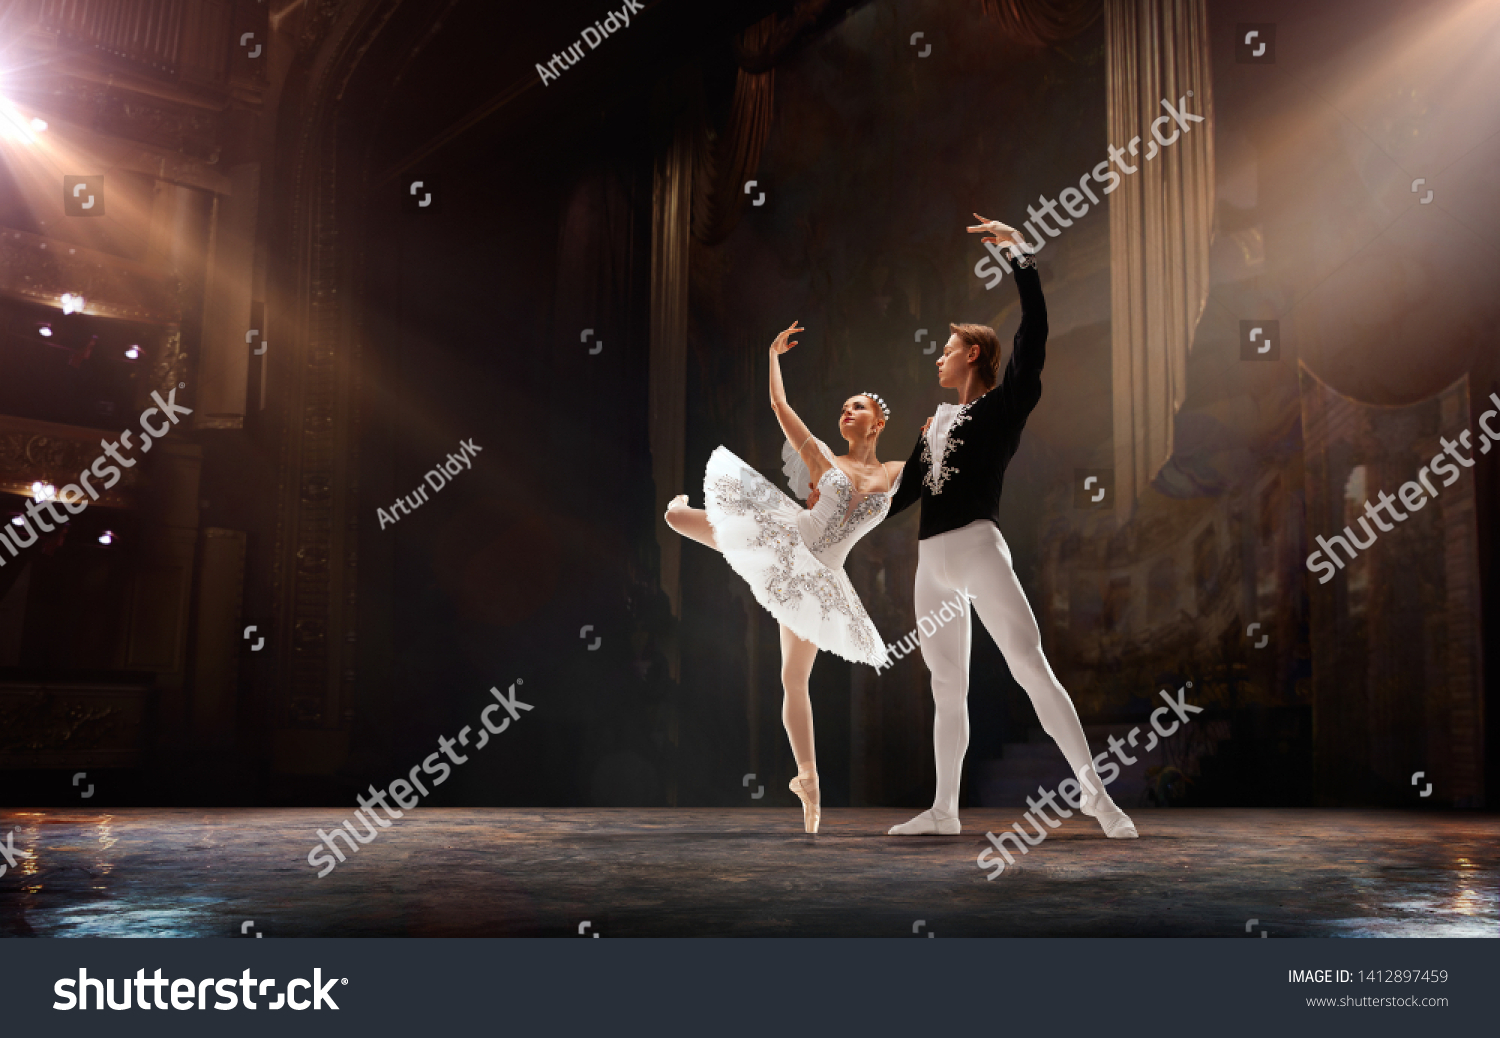 Ballet. Classical ballet performed by a couple of ballet dancers on the stage of the opera house. #1412897459